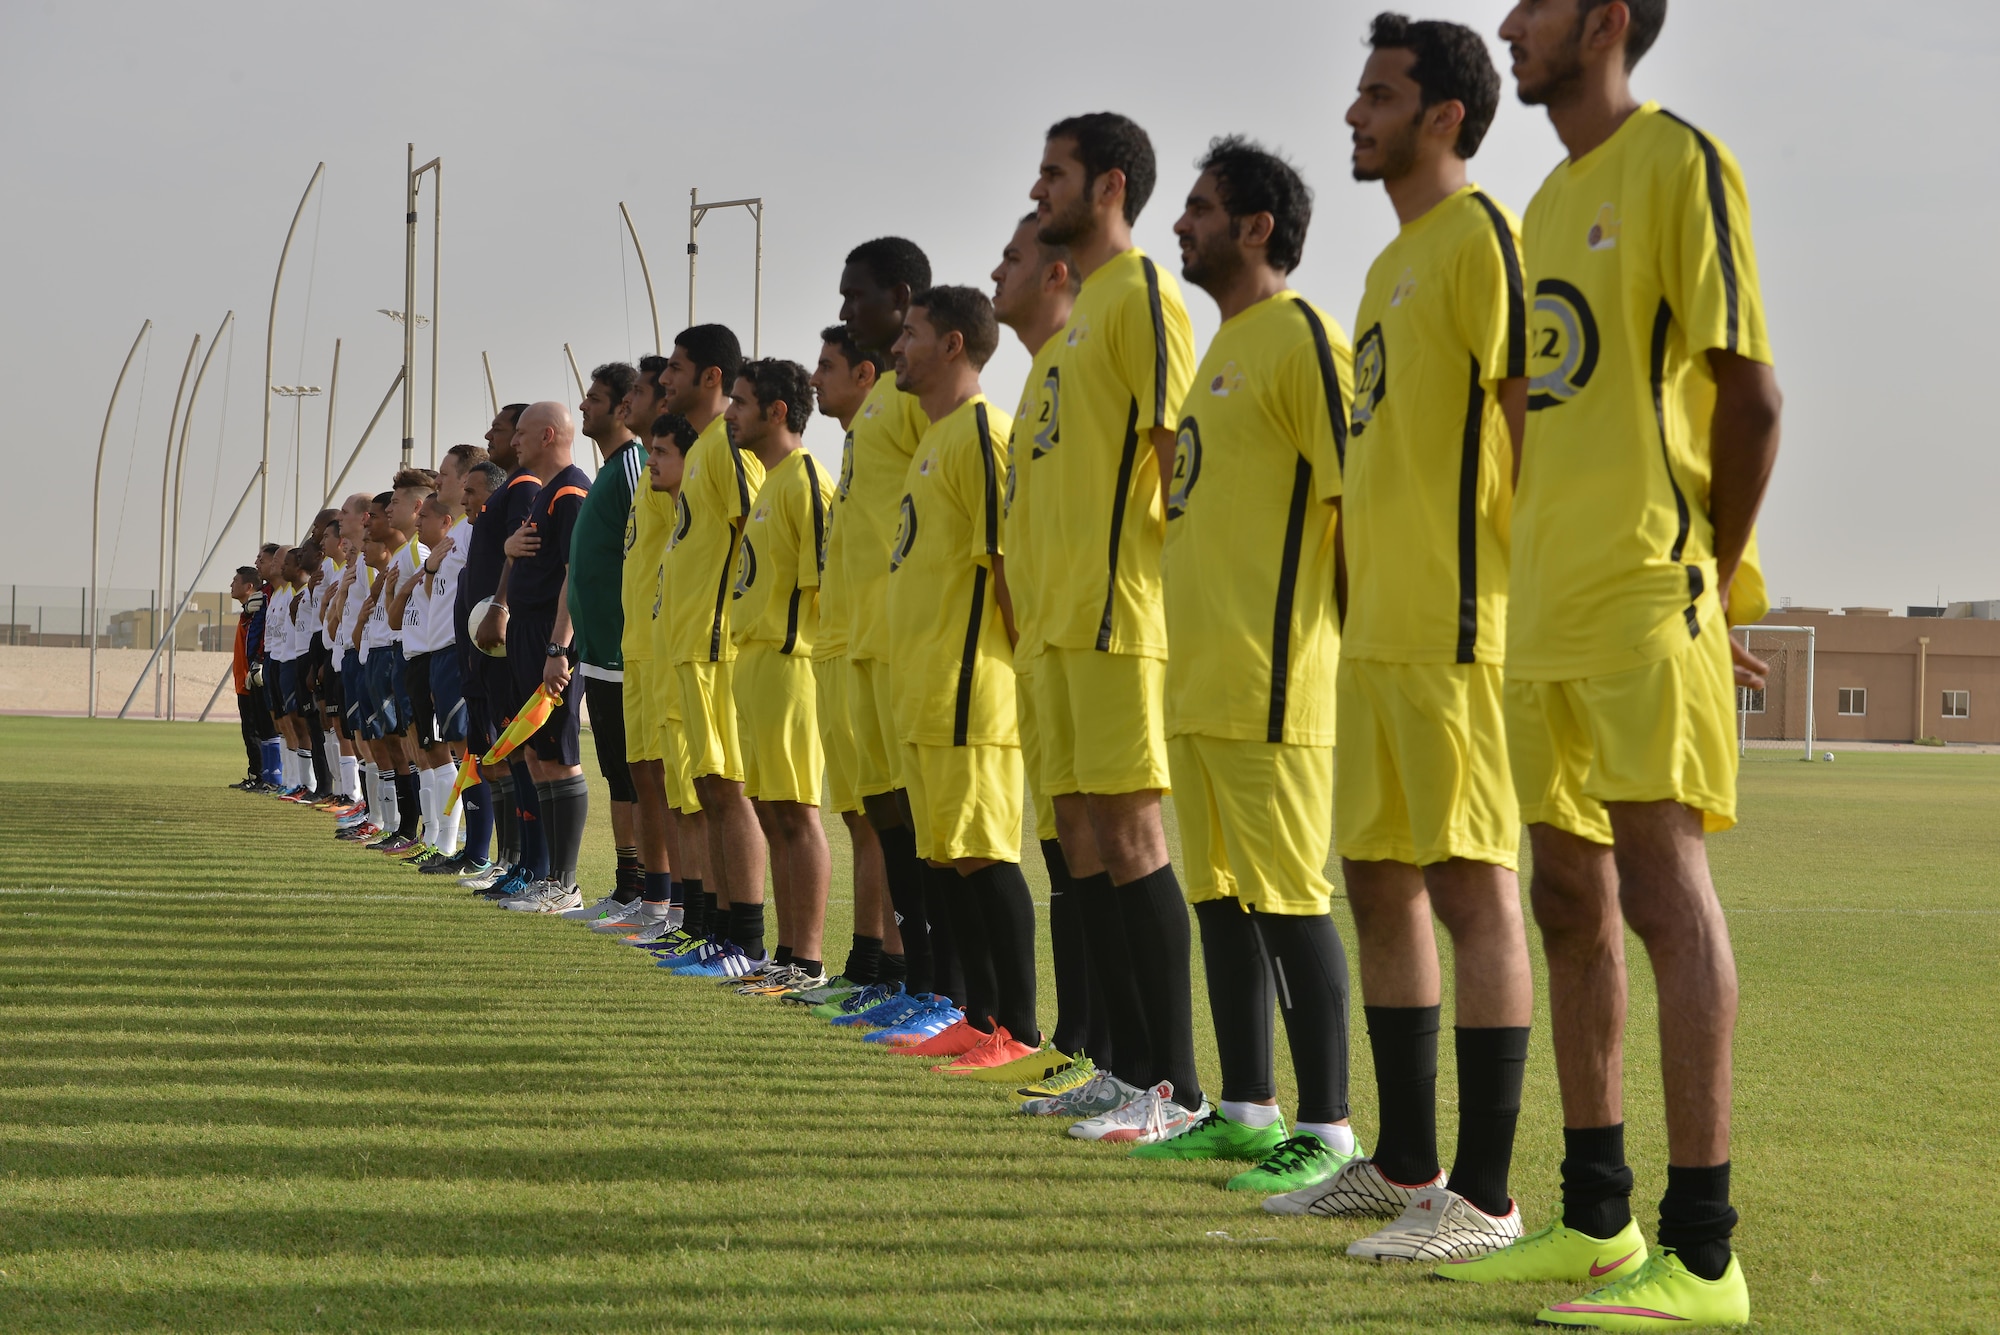 Deployed U.S. and Qatari military members stand as both national anthems are played prior to the start of a soccer match in celebration of the 240th U.S.  Army birthday June 14, 2015 at Al Udeid Air Base, Qatar. AUAB All-Stars planned a soccer match to help strengthen the partnership between the U.S. and Qatari military and build friendships between service members. (U.S. Air Force photo/Staff Sgt. Alexandre Montes)